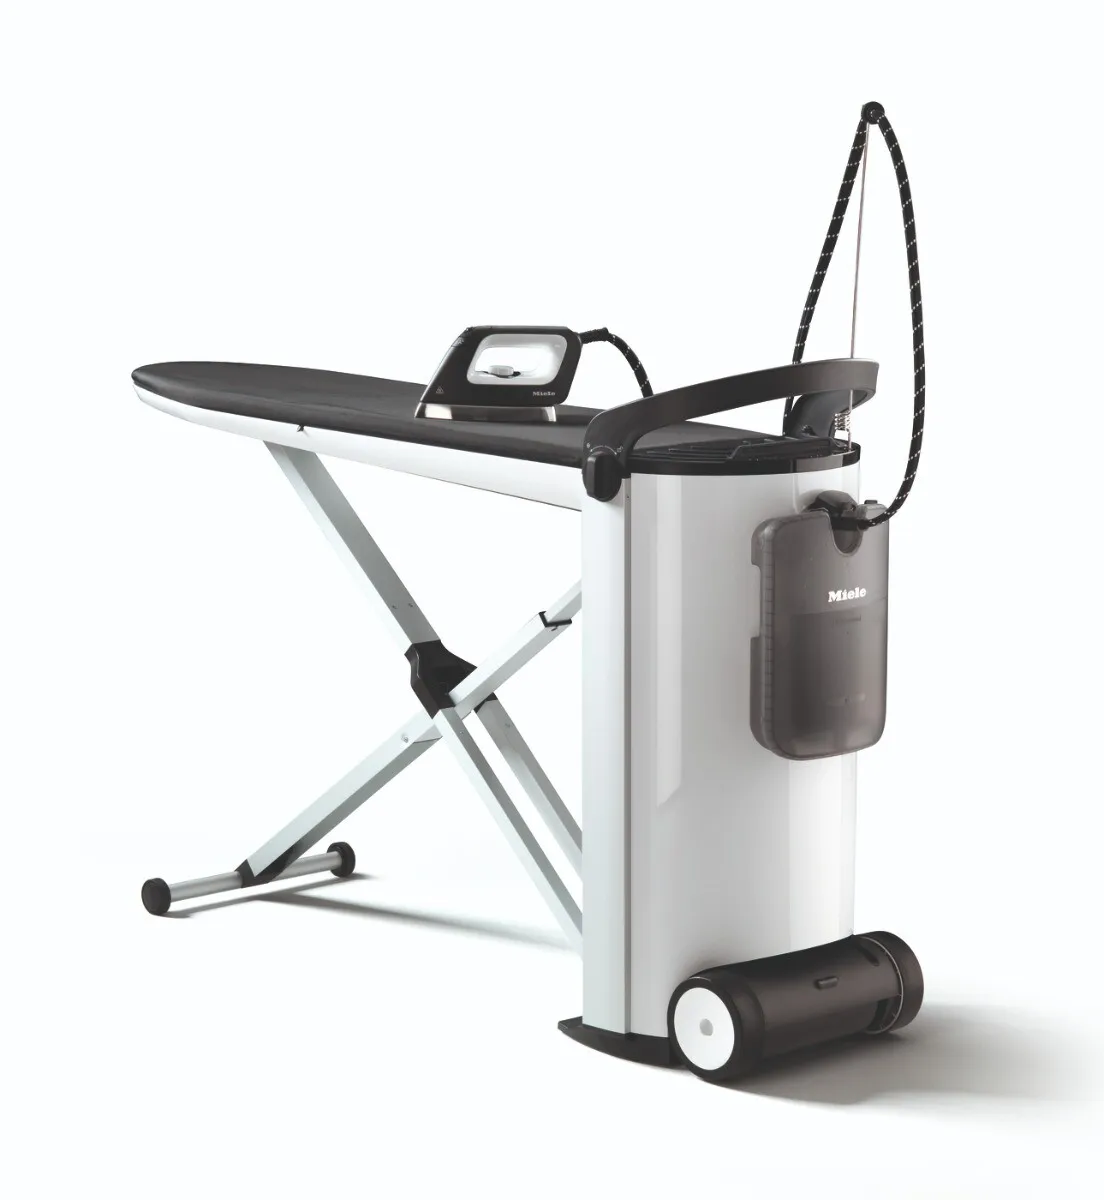 Miele PIB 100 Professional Steam Ironing System